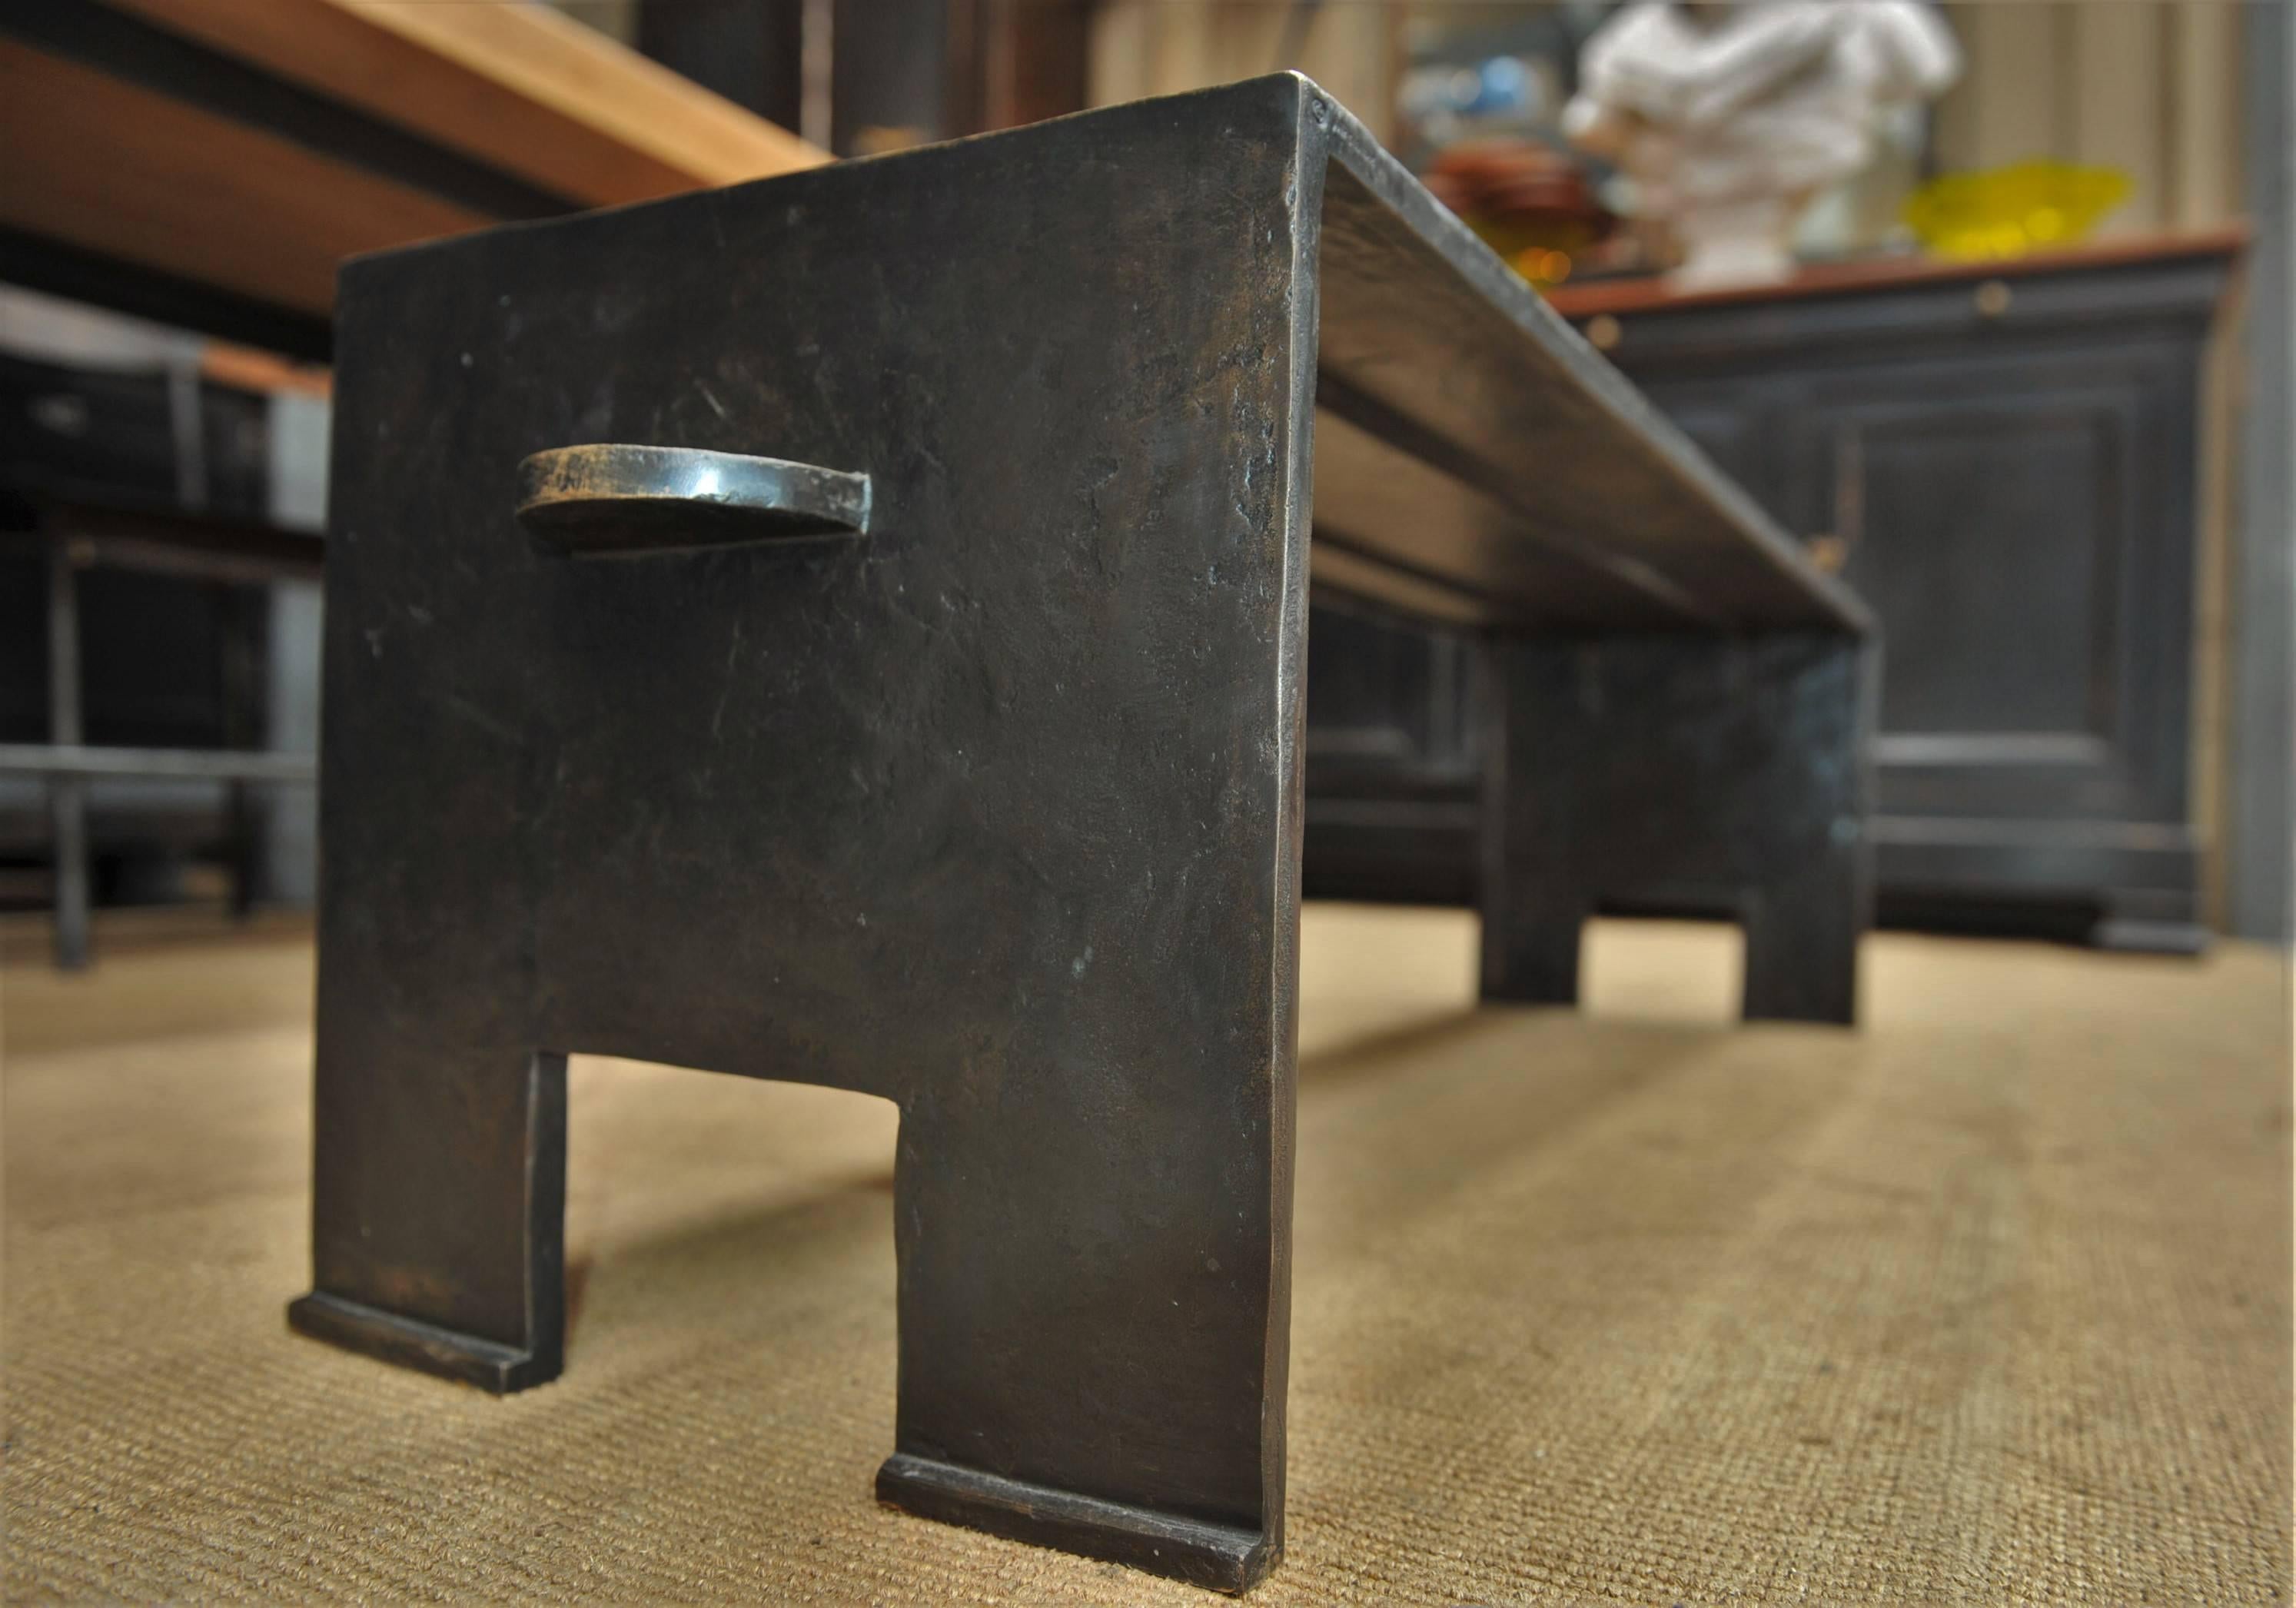 French Limited edition (one of five) dark brown patina bronze design coffee table or bench by Eric Schmitt, for Christian Liaigre edition
model 